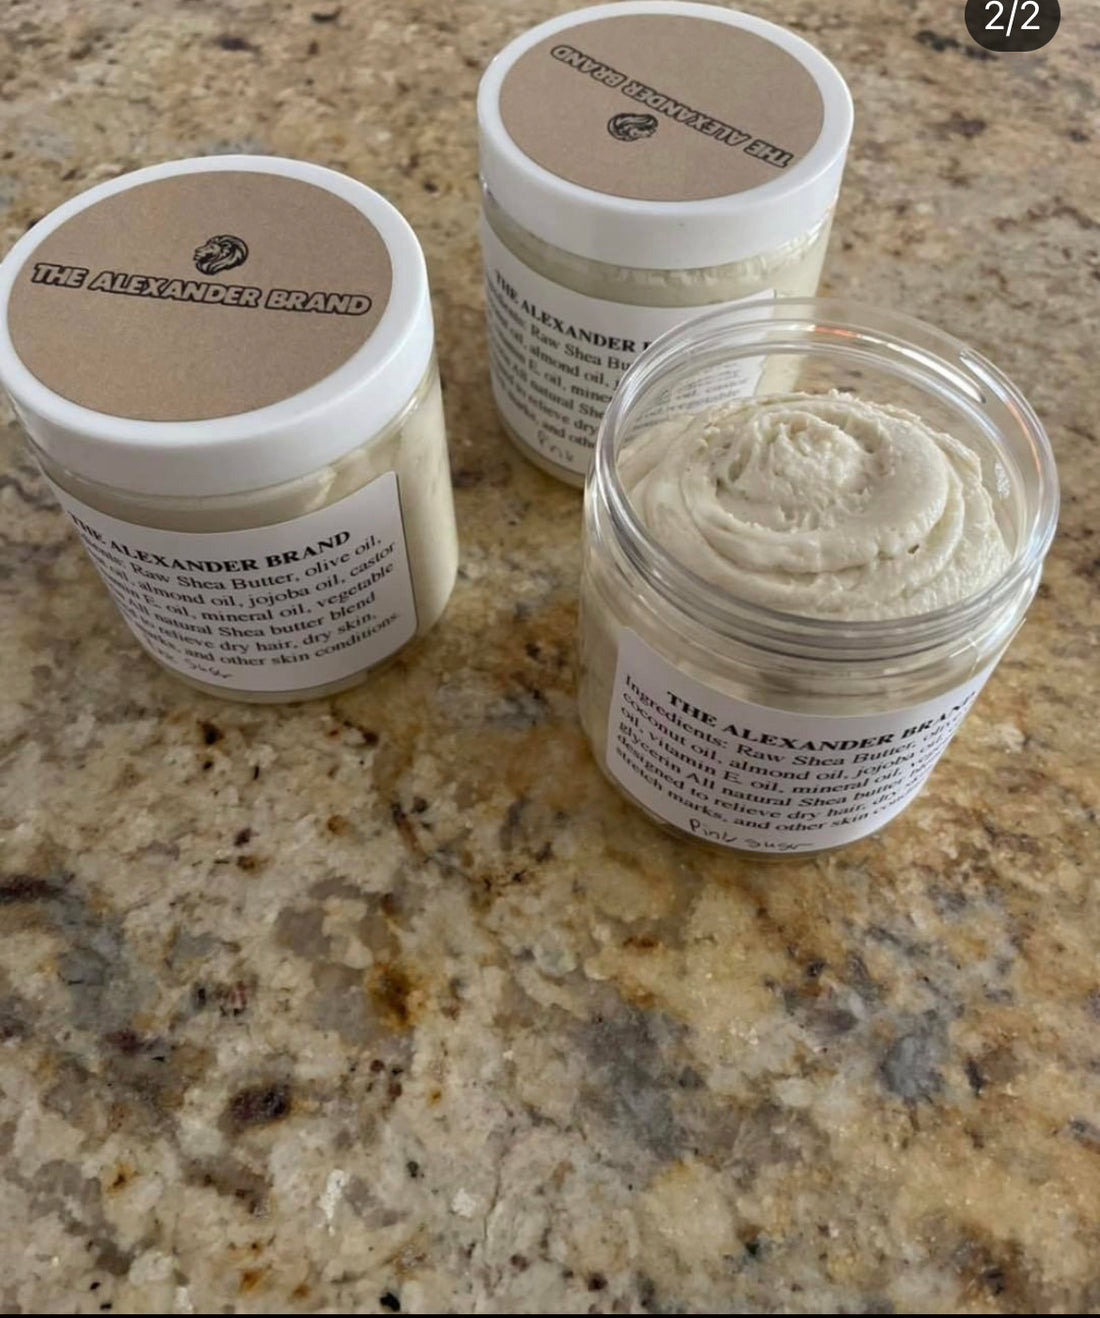 WHIPPED SHEA-BUTTER LOTION